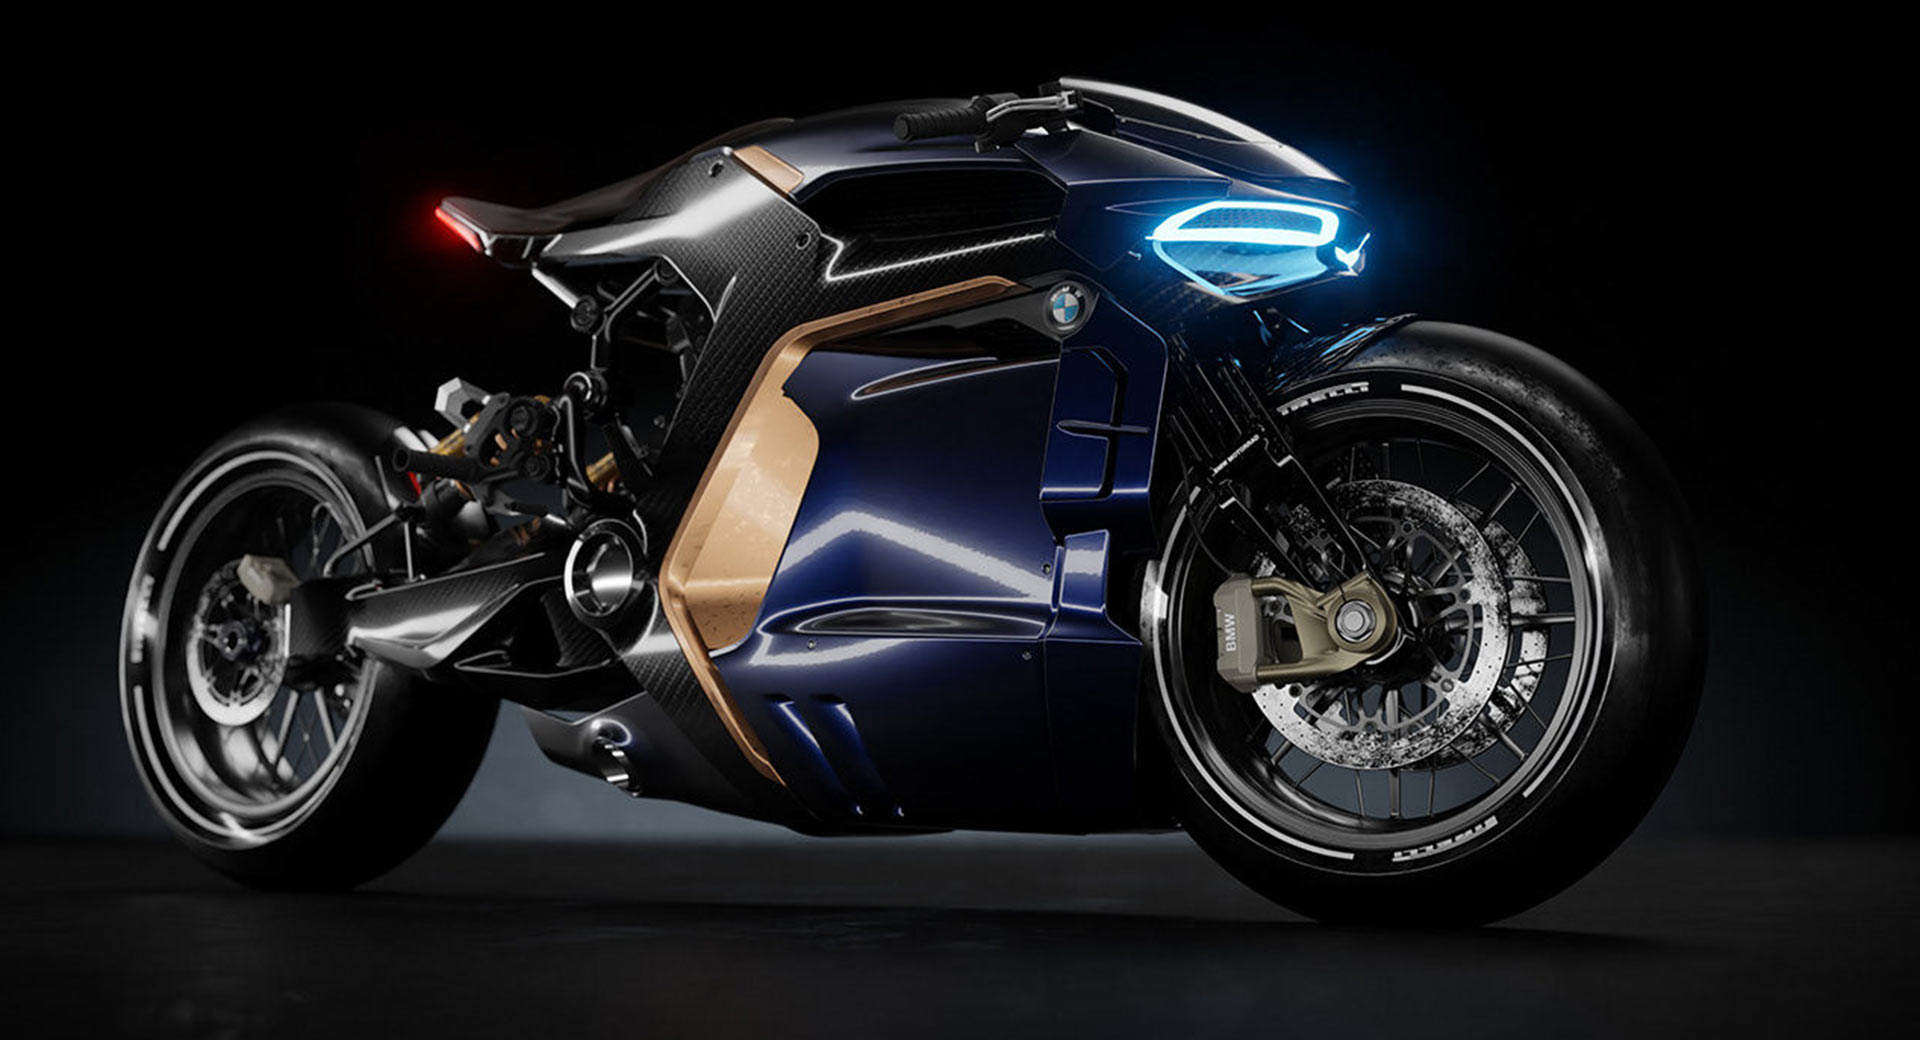 BMW Motorcycle Concept Might Look Uncomfortable To Ride But It Sure